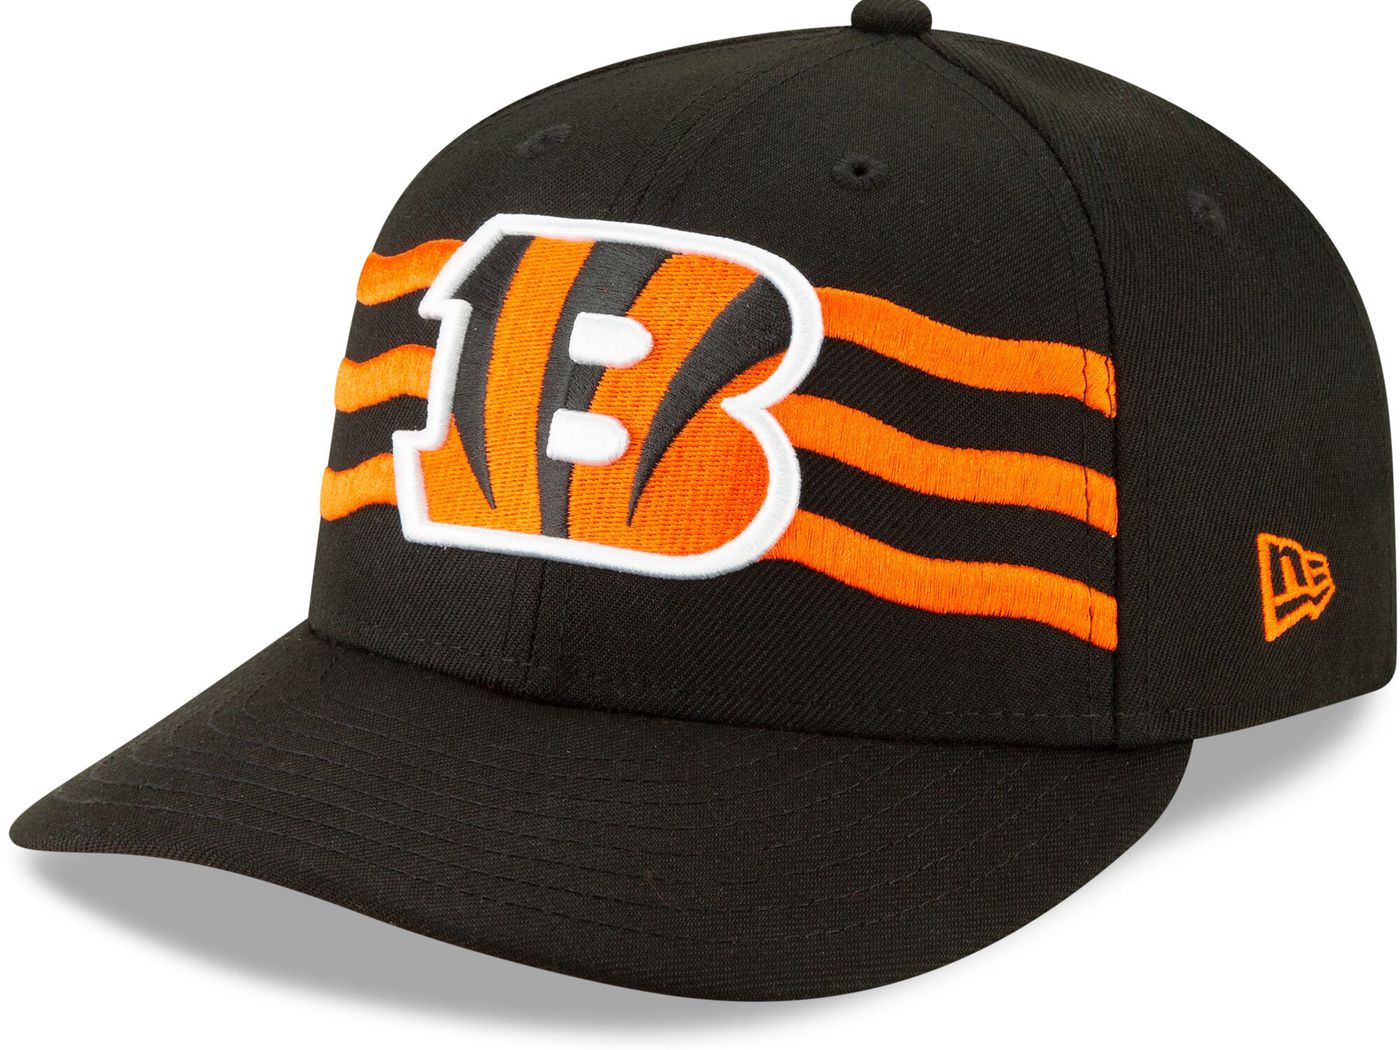 black and white bengals hat